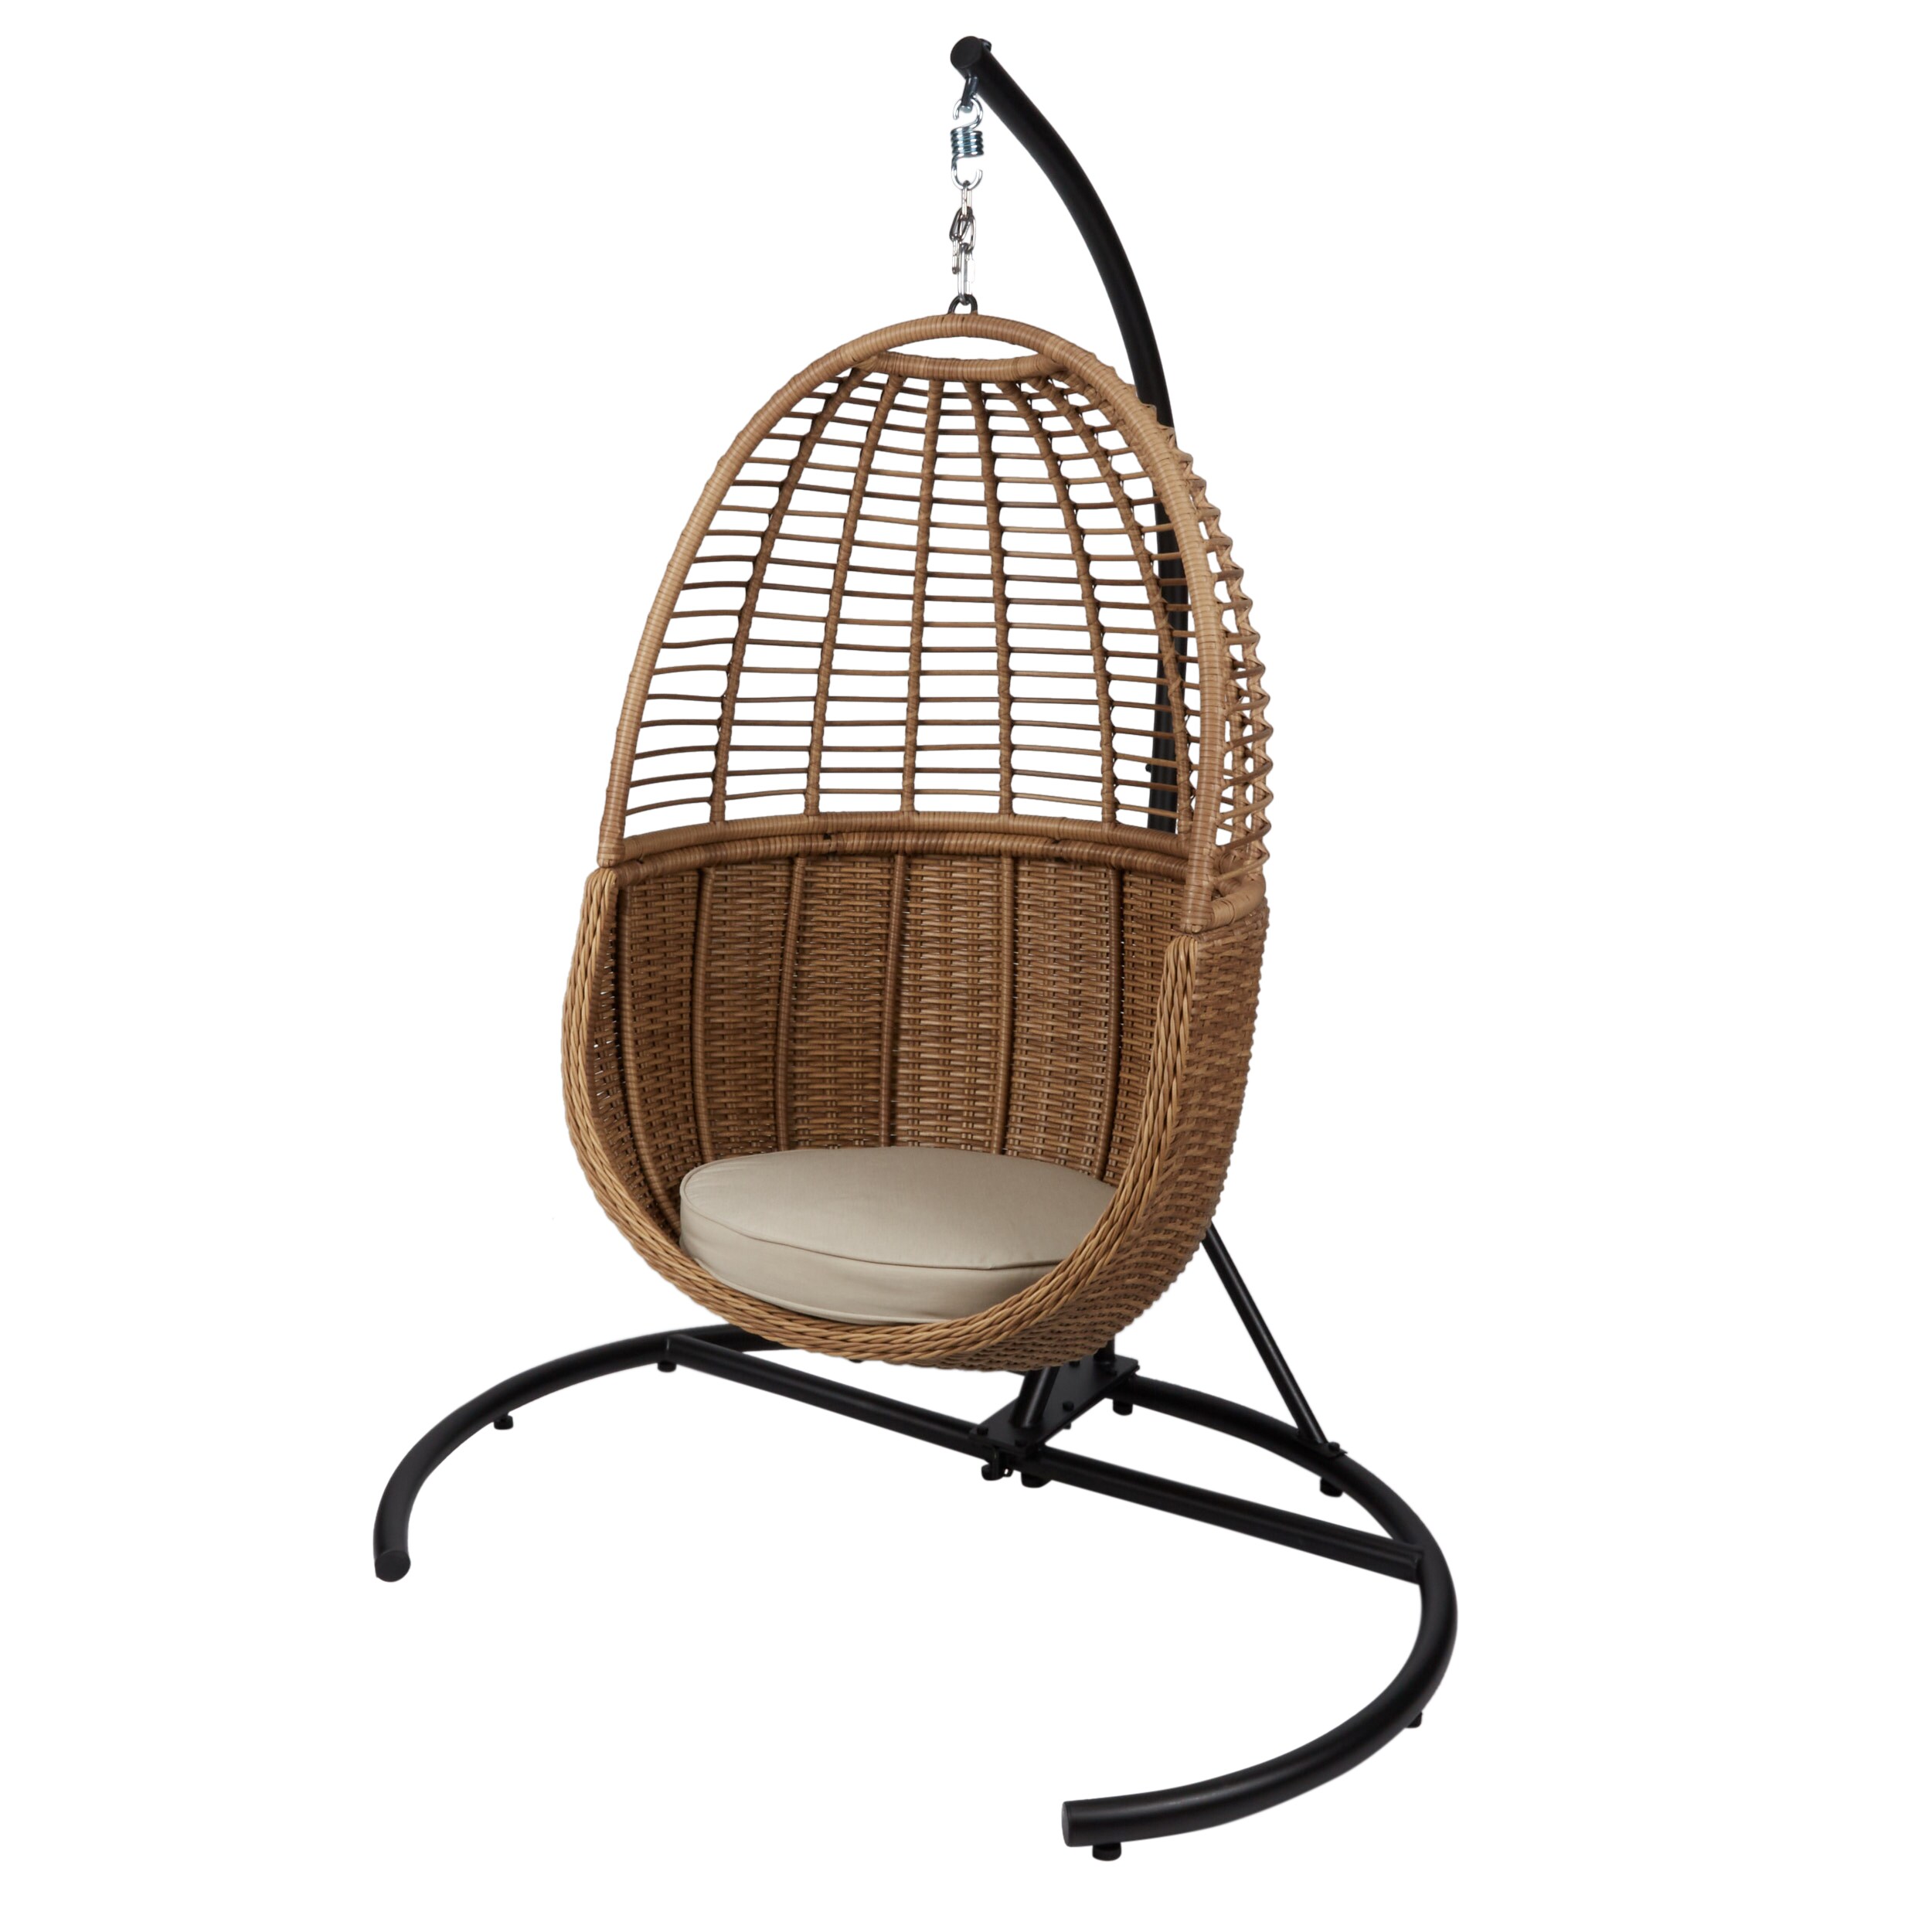 F09LG Swing Egg Chair with Leg Rest by Artisan Furniture - U-TRADE